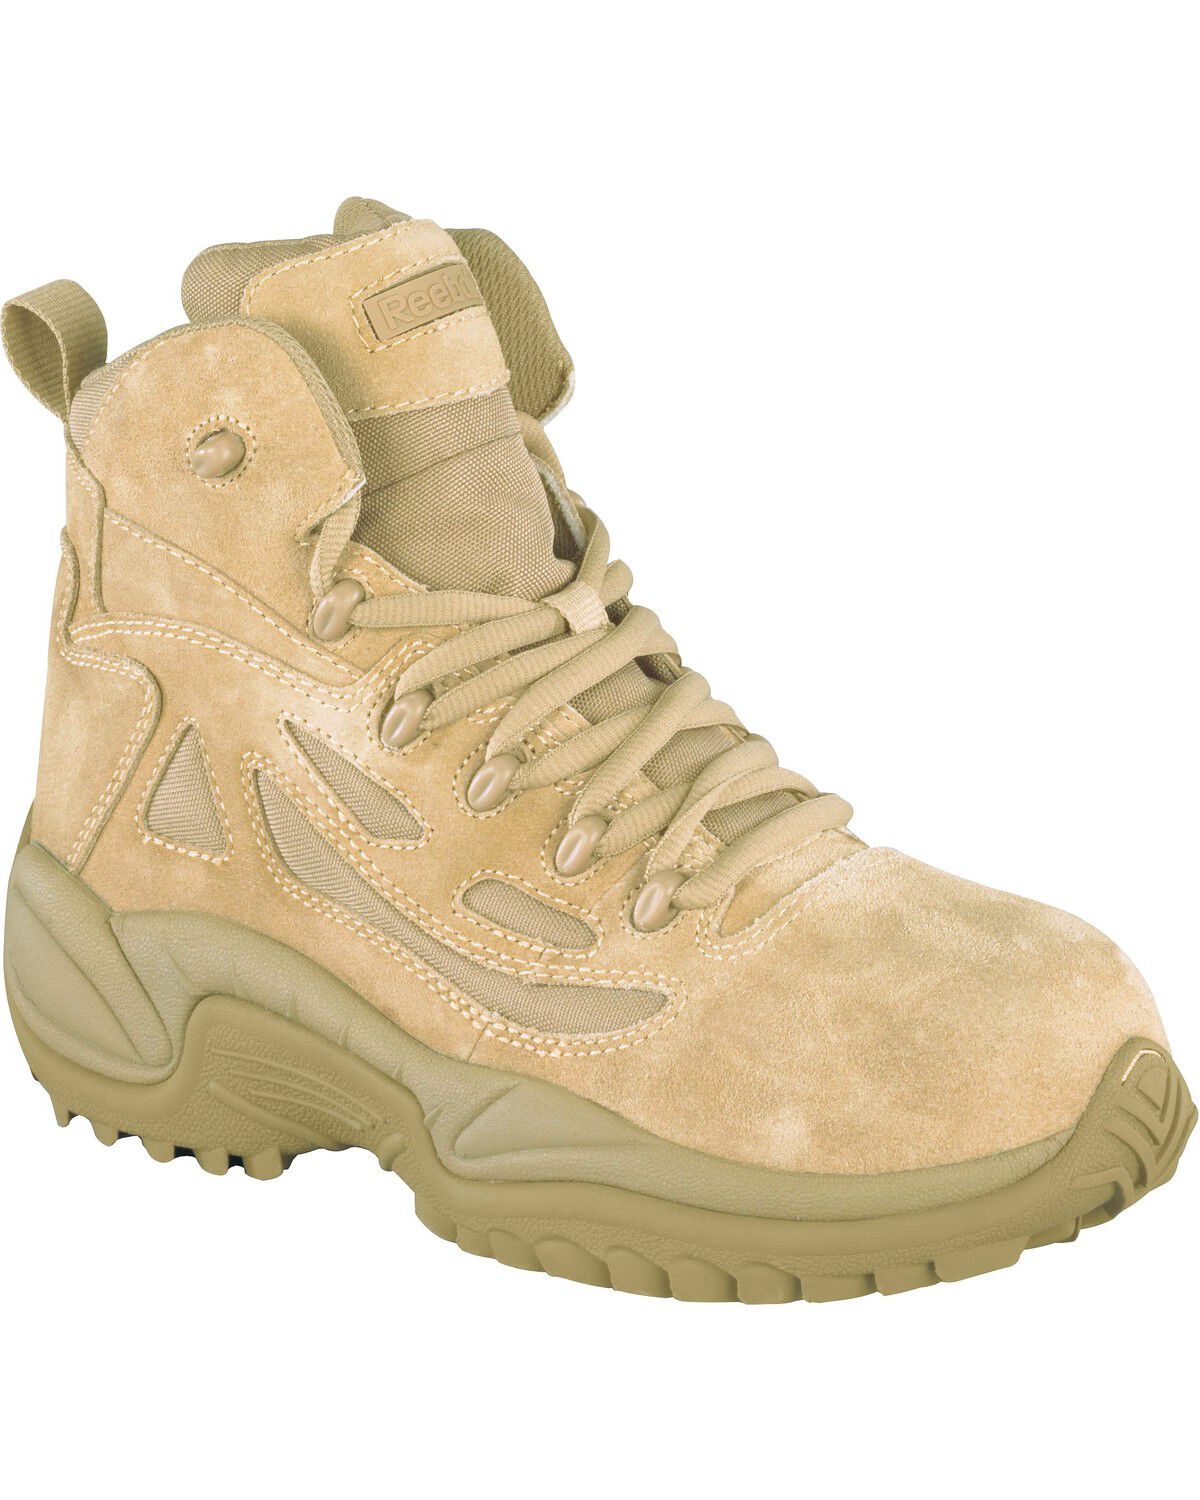 reebok work boots for sale